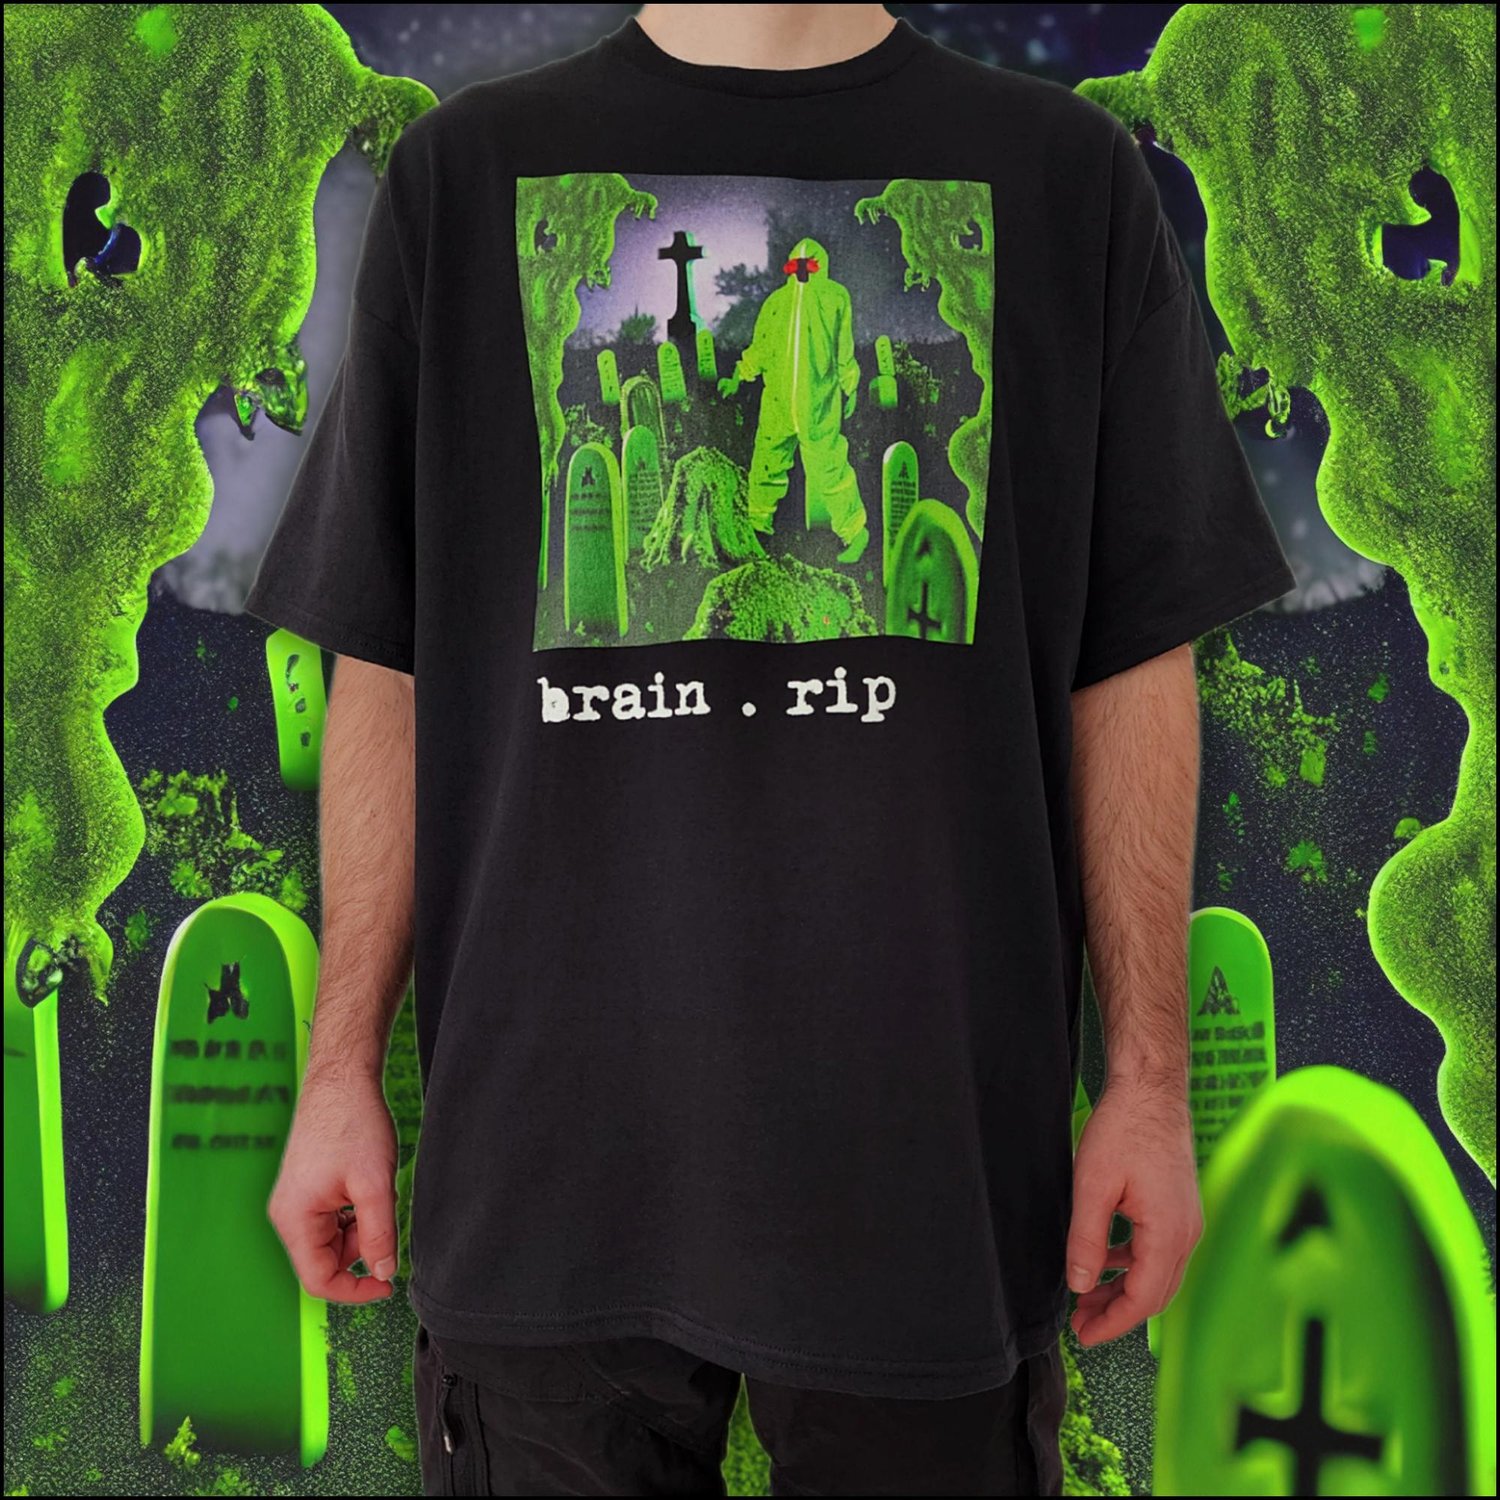 infected remains shirt - black